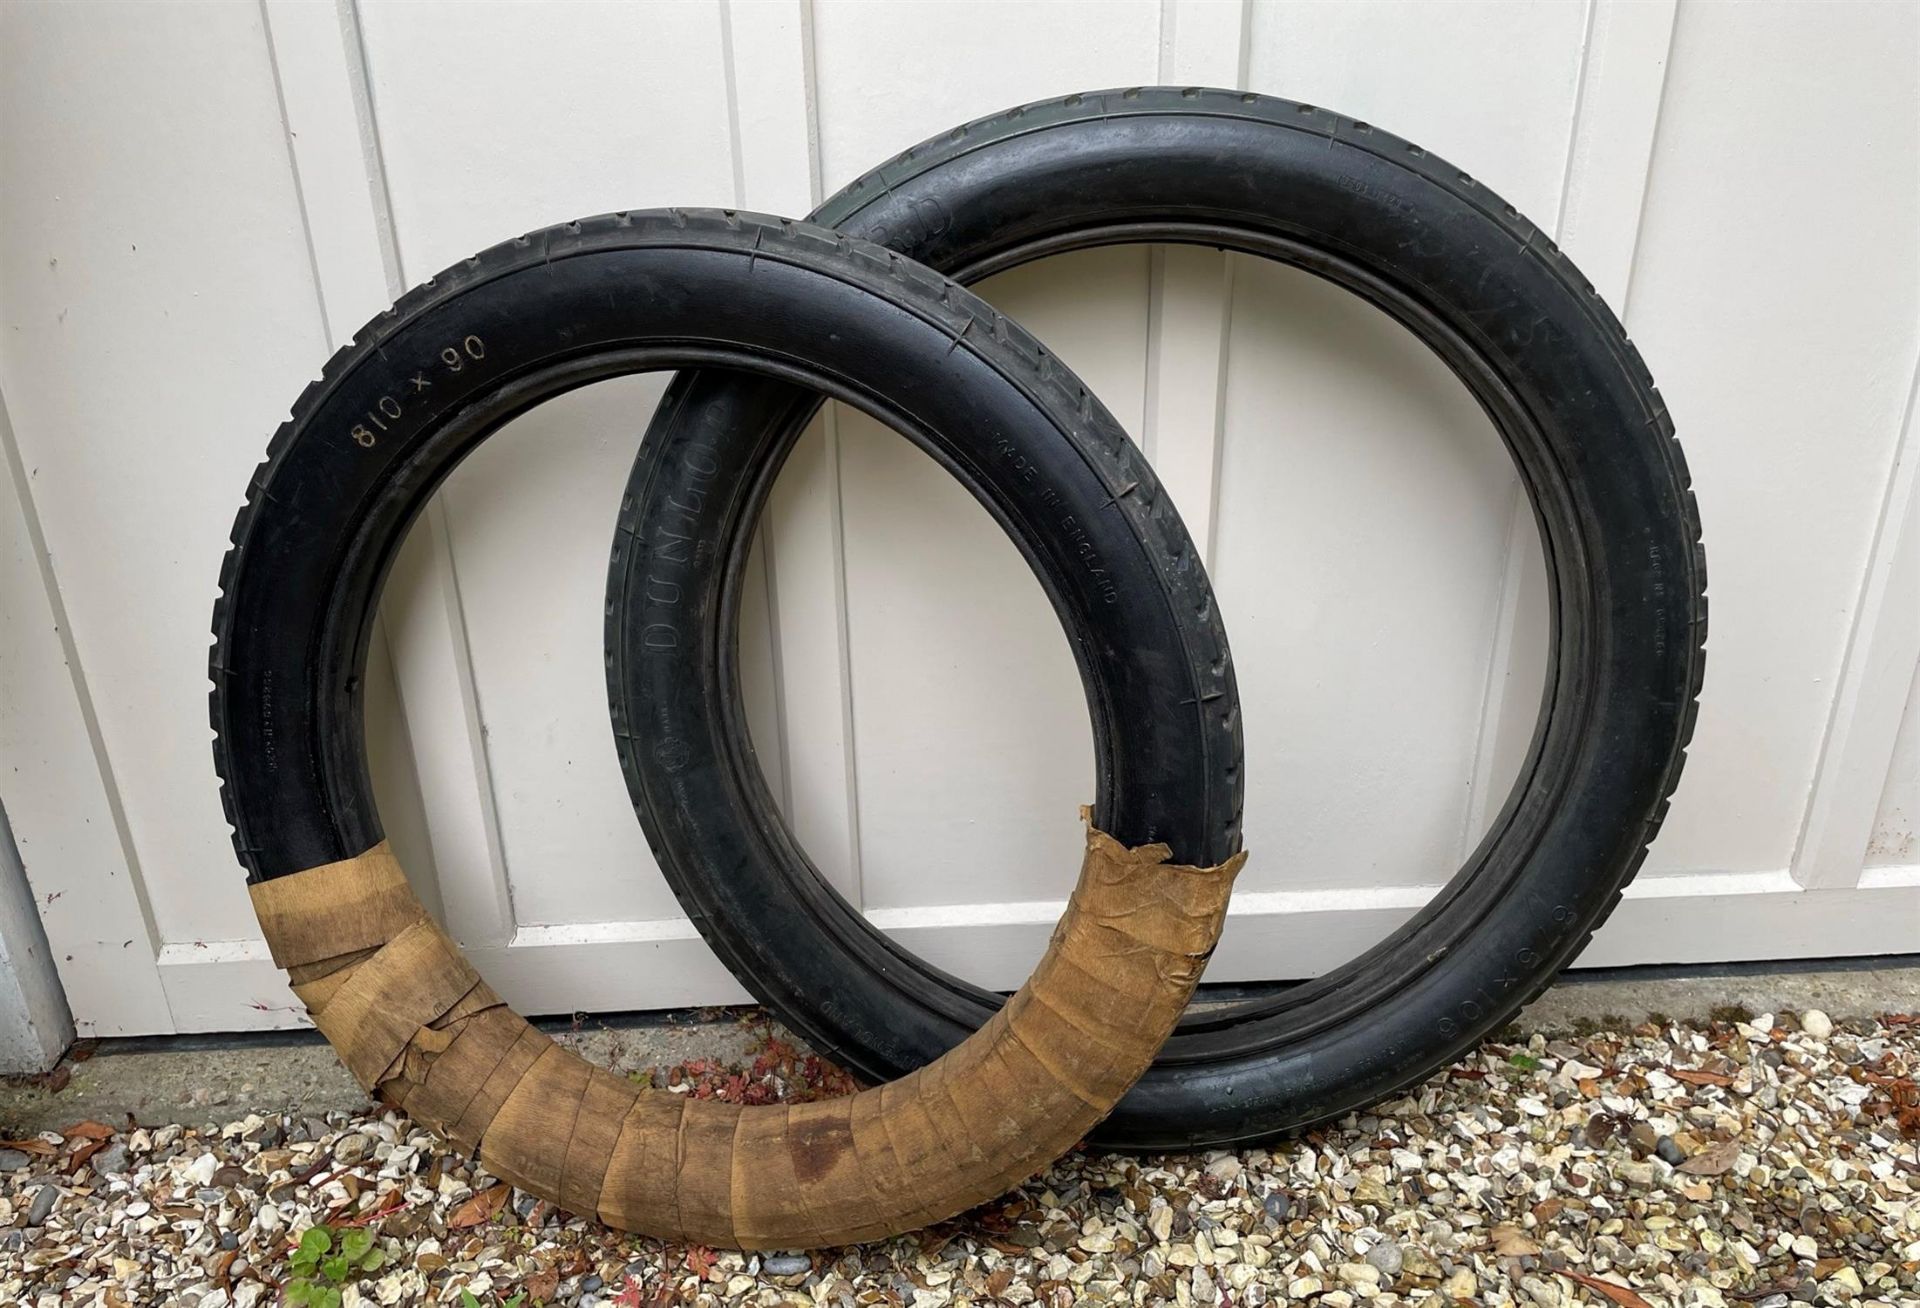 Two Vintage Dunlop Cord Road Tyres - Image 7 of 7